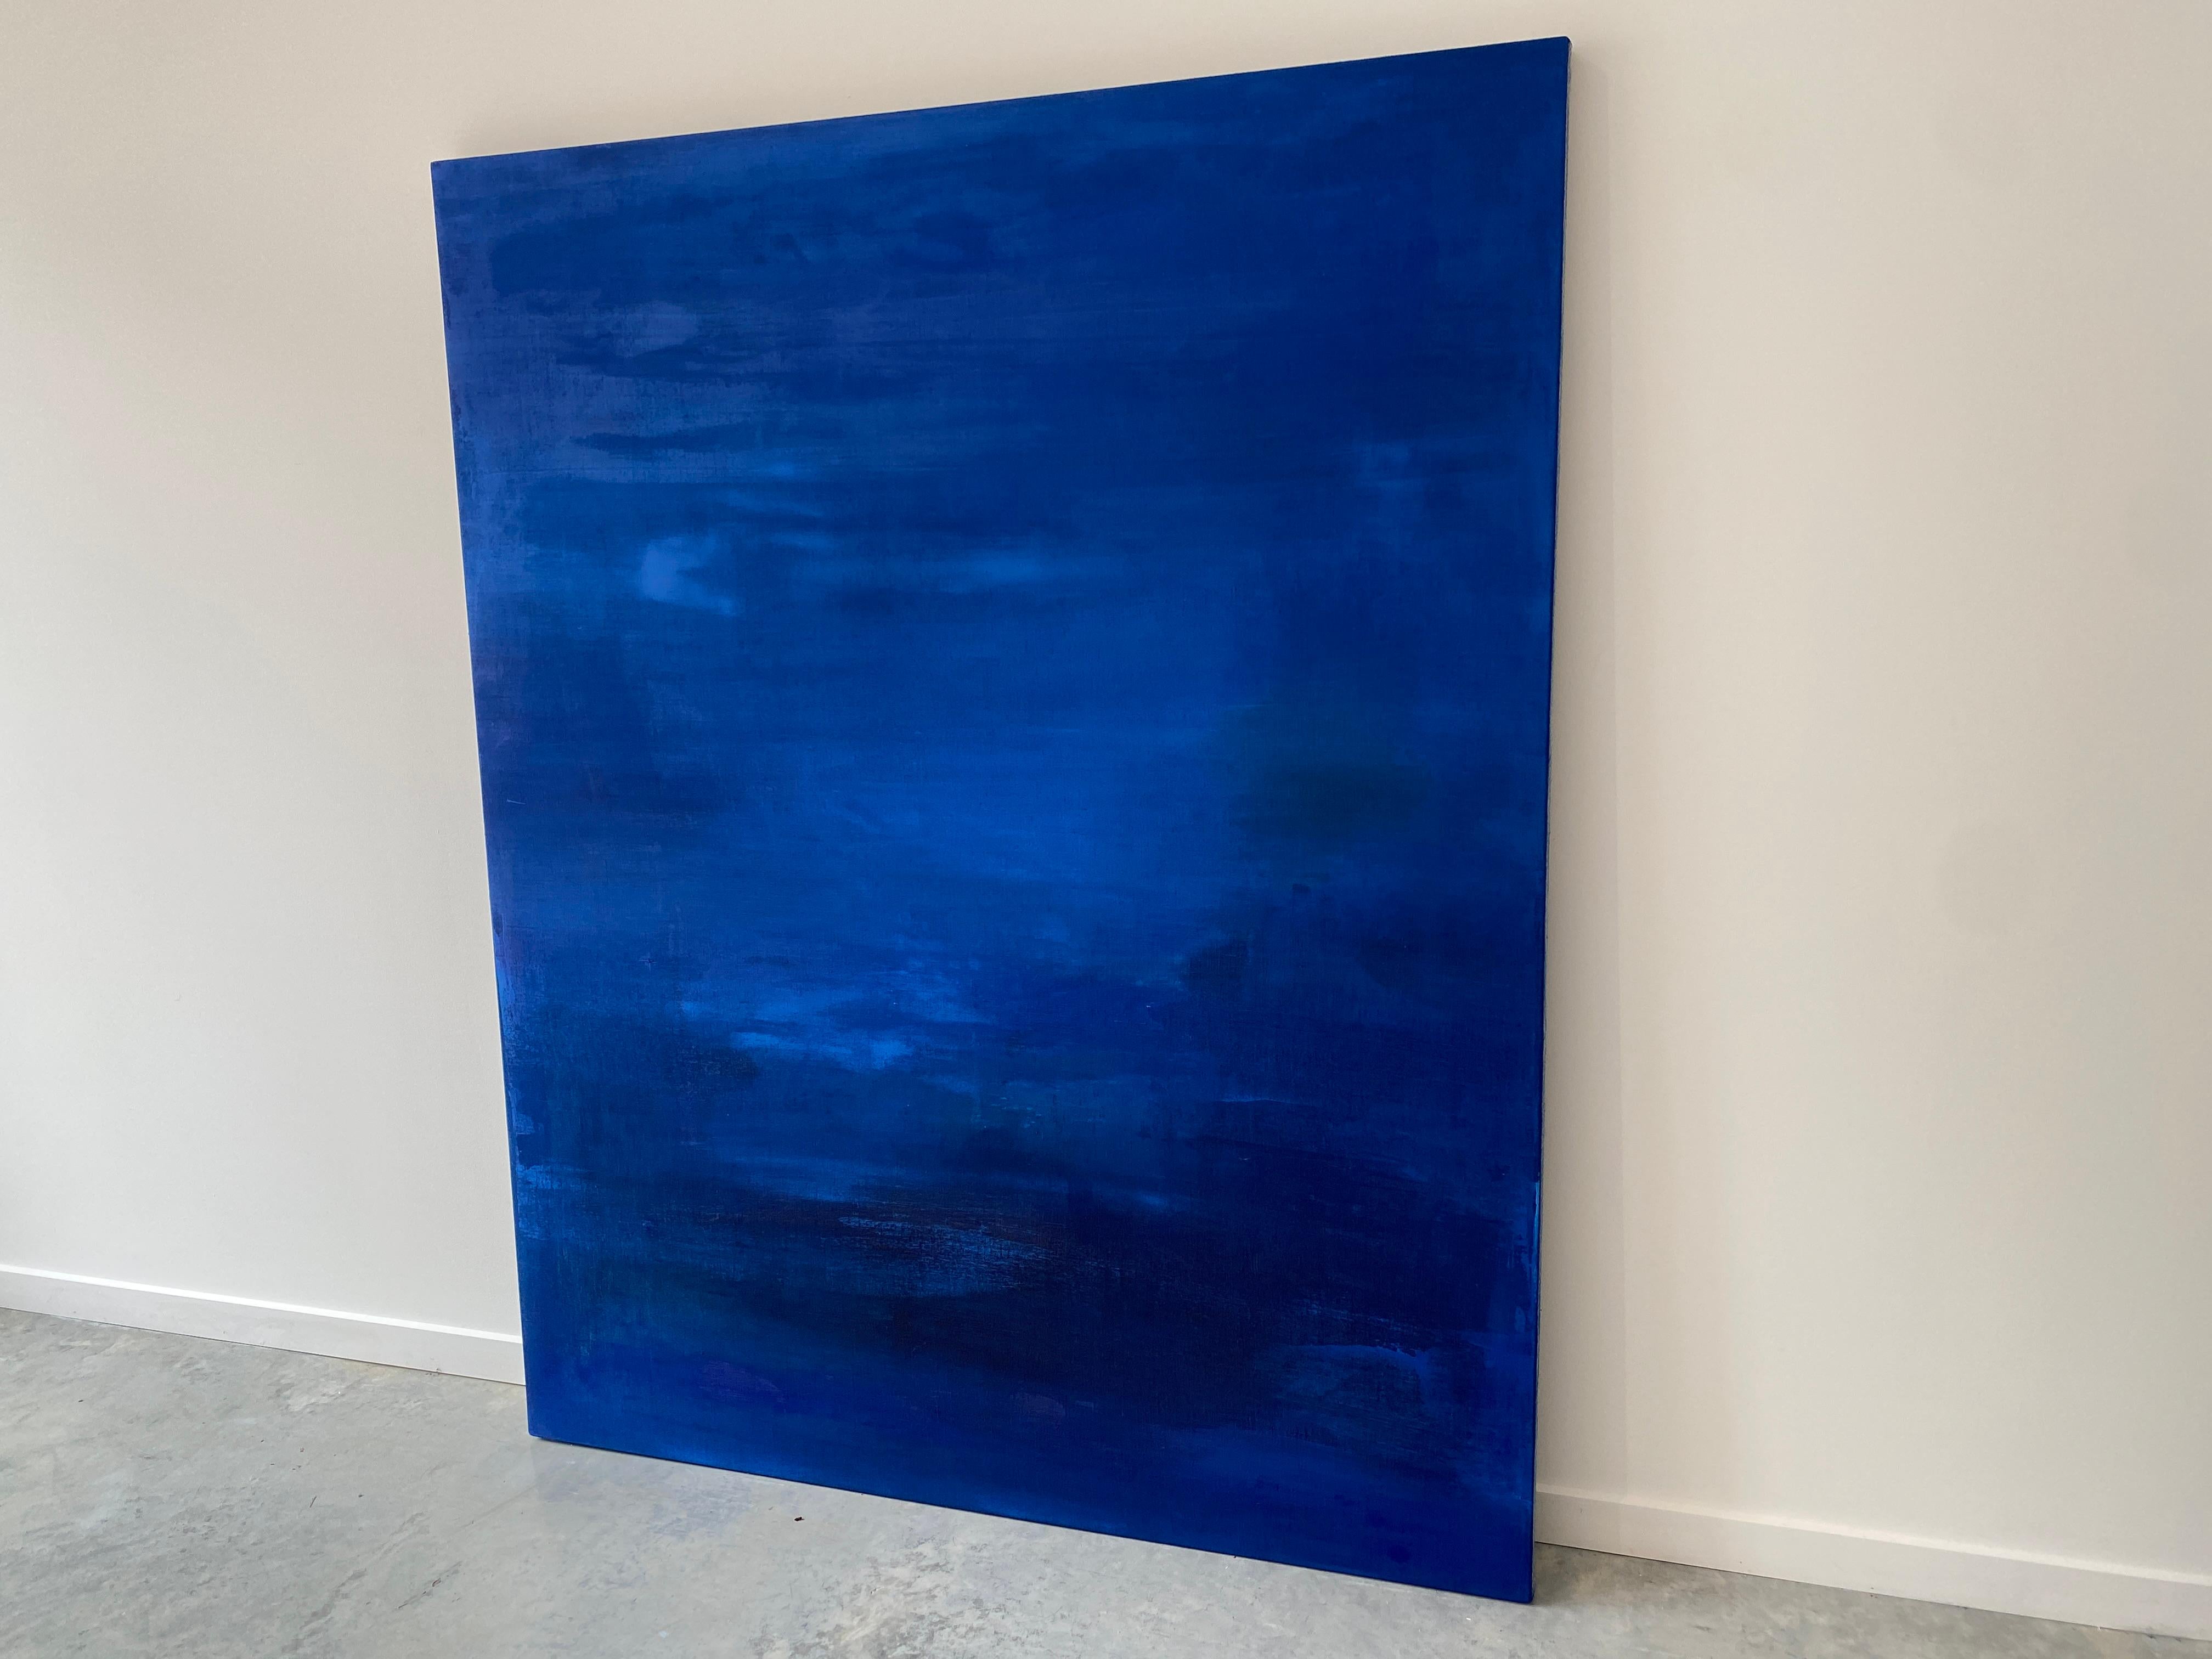 Big Blue cobalt large scale minimalist abstract painting statement artwork For Sale 4